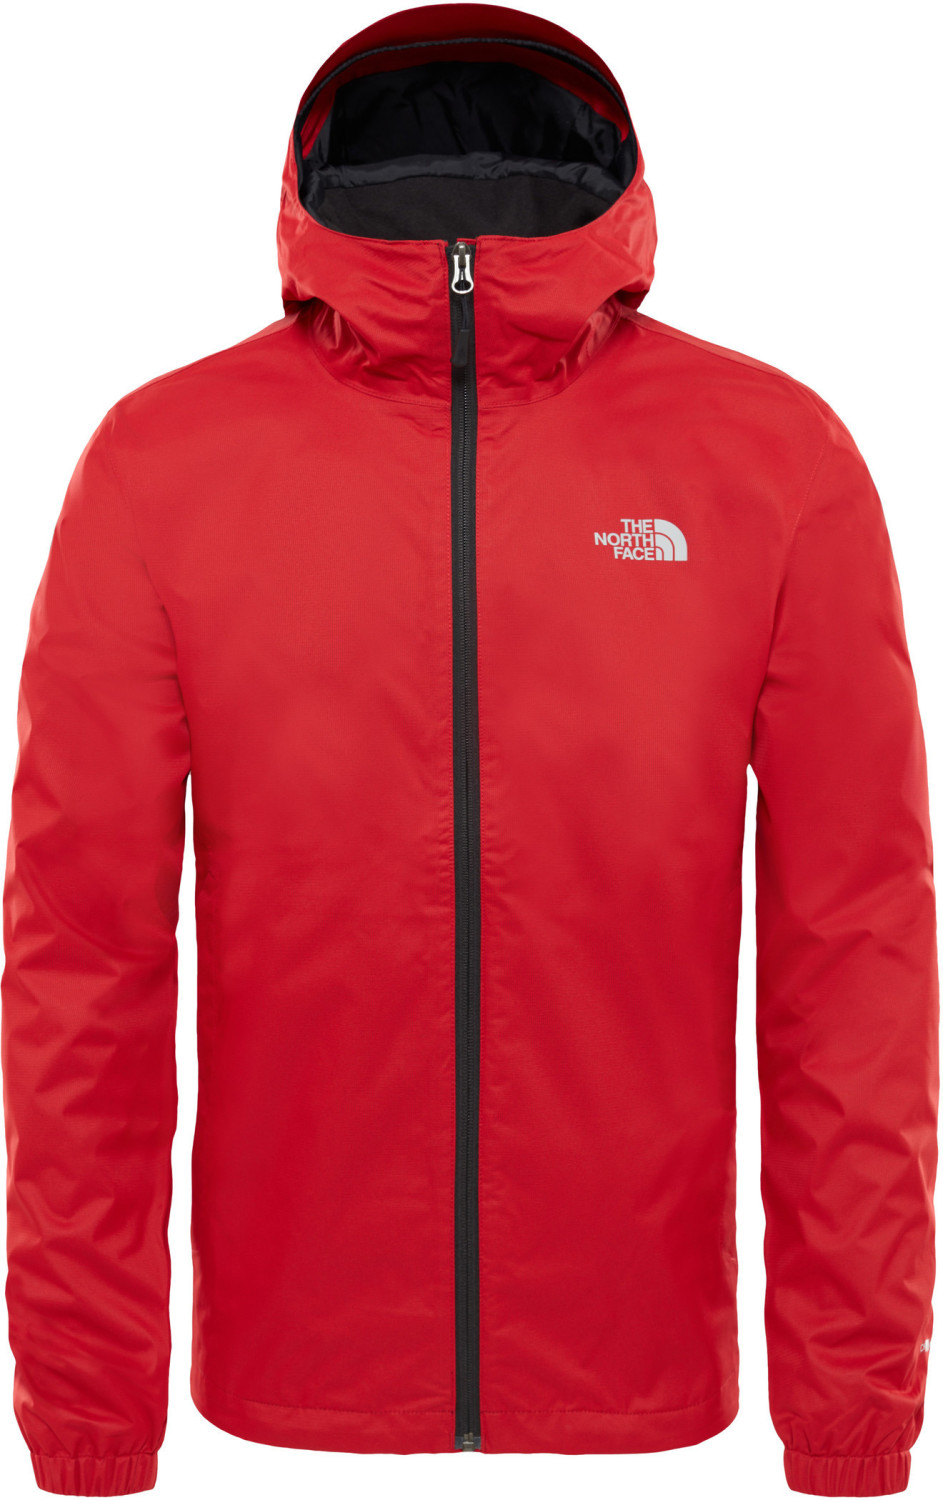 Buy The North Face Men's Quest Jacket rage red/black heather from £63. ...